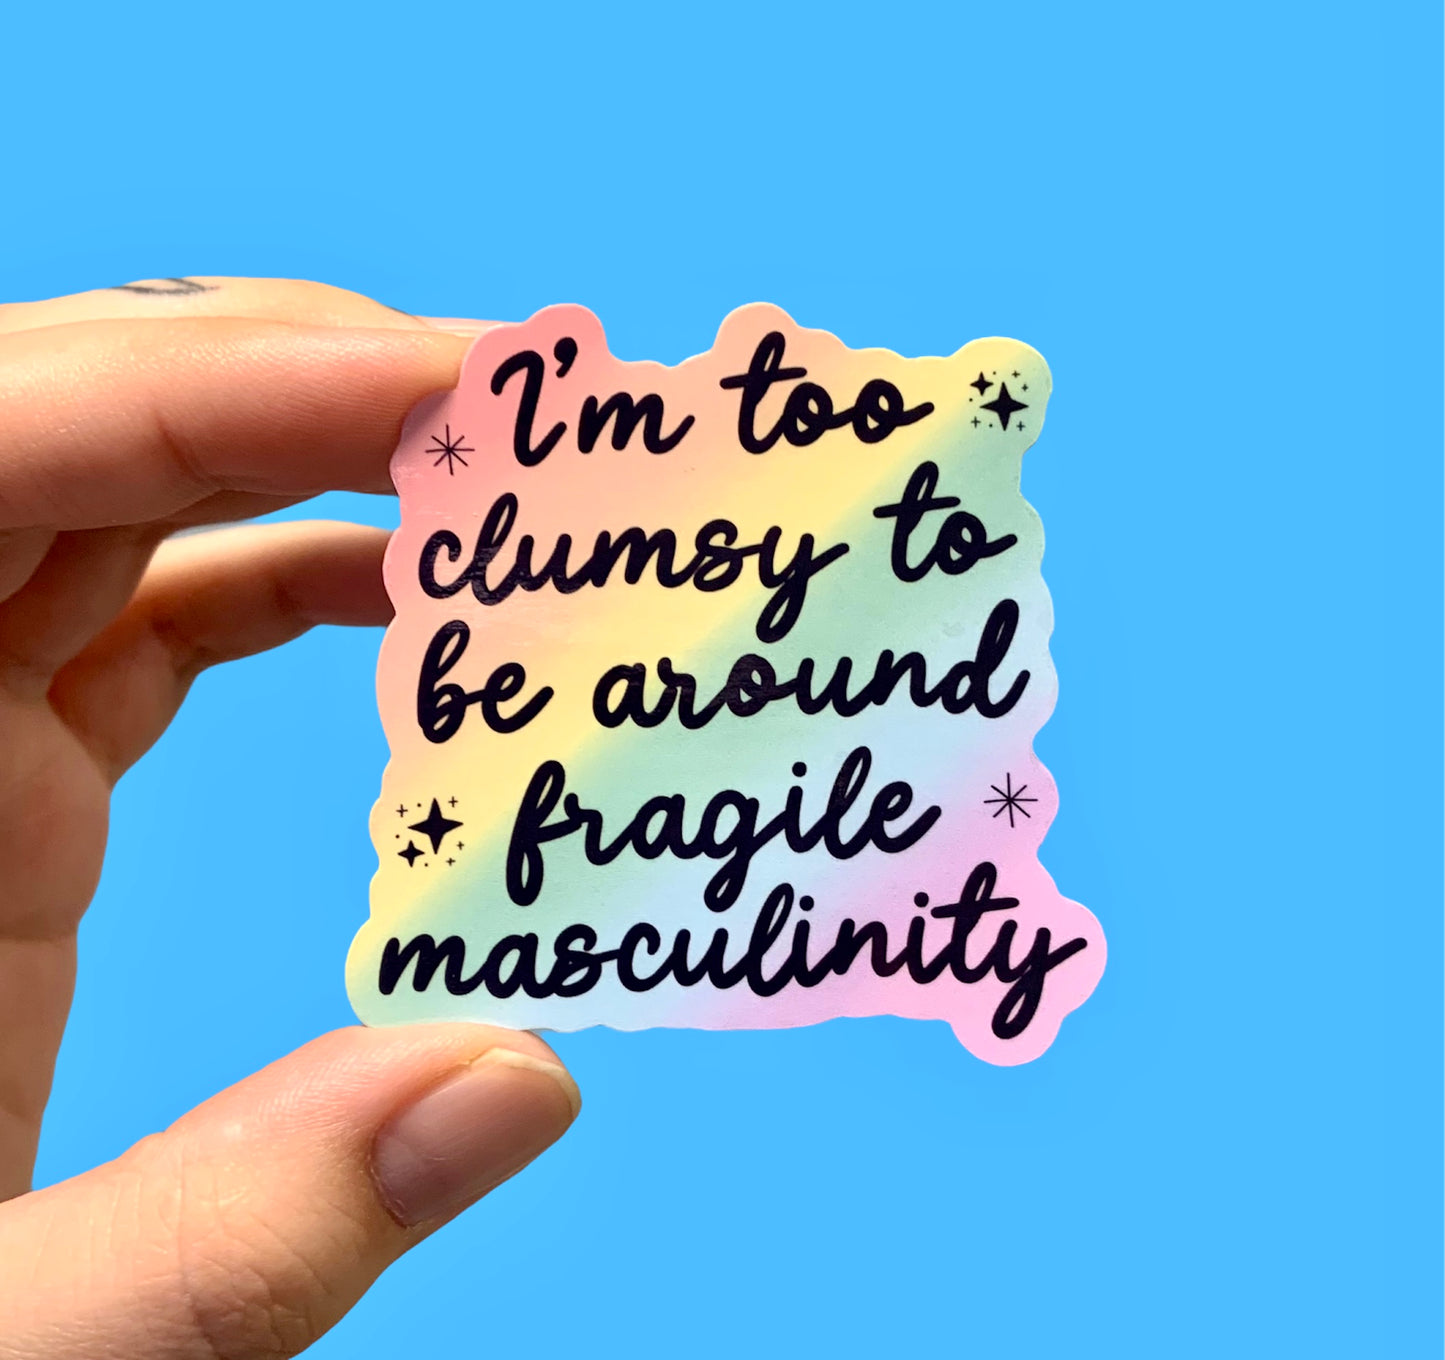 Too clumsy to be around fragile masculinity (pack of 3 or 5 stickers)